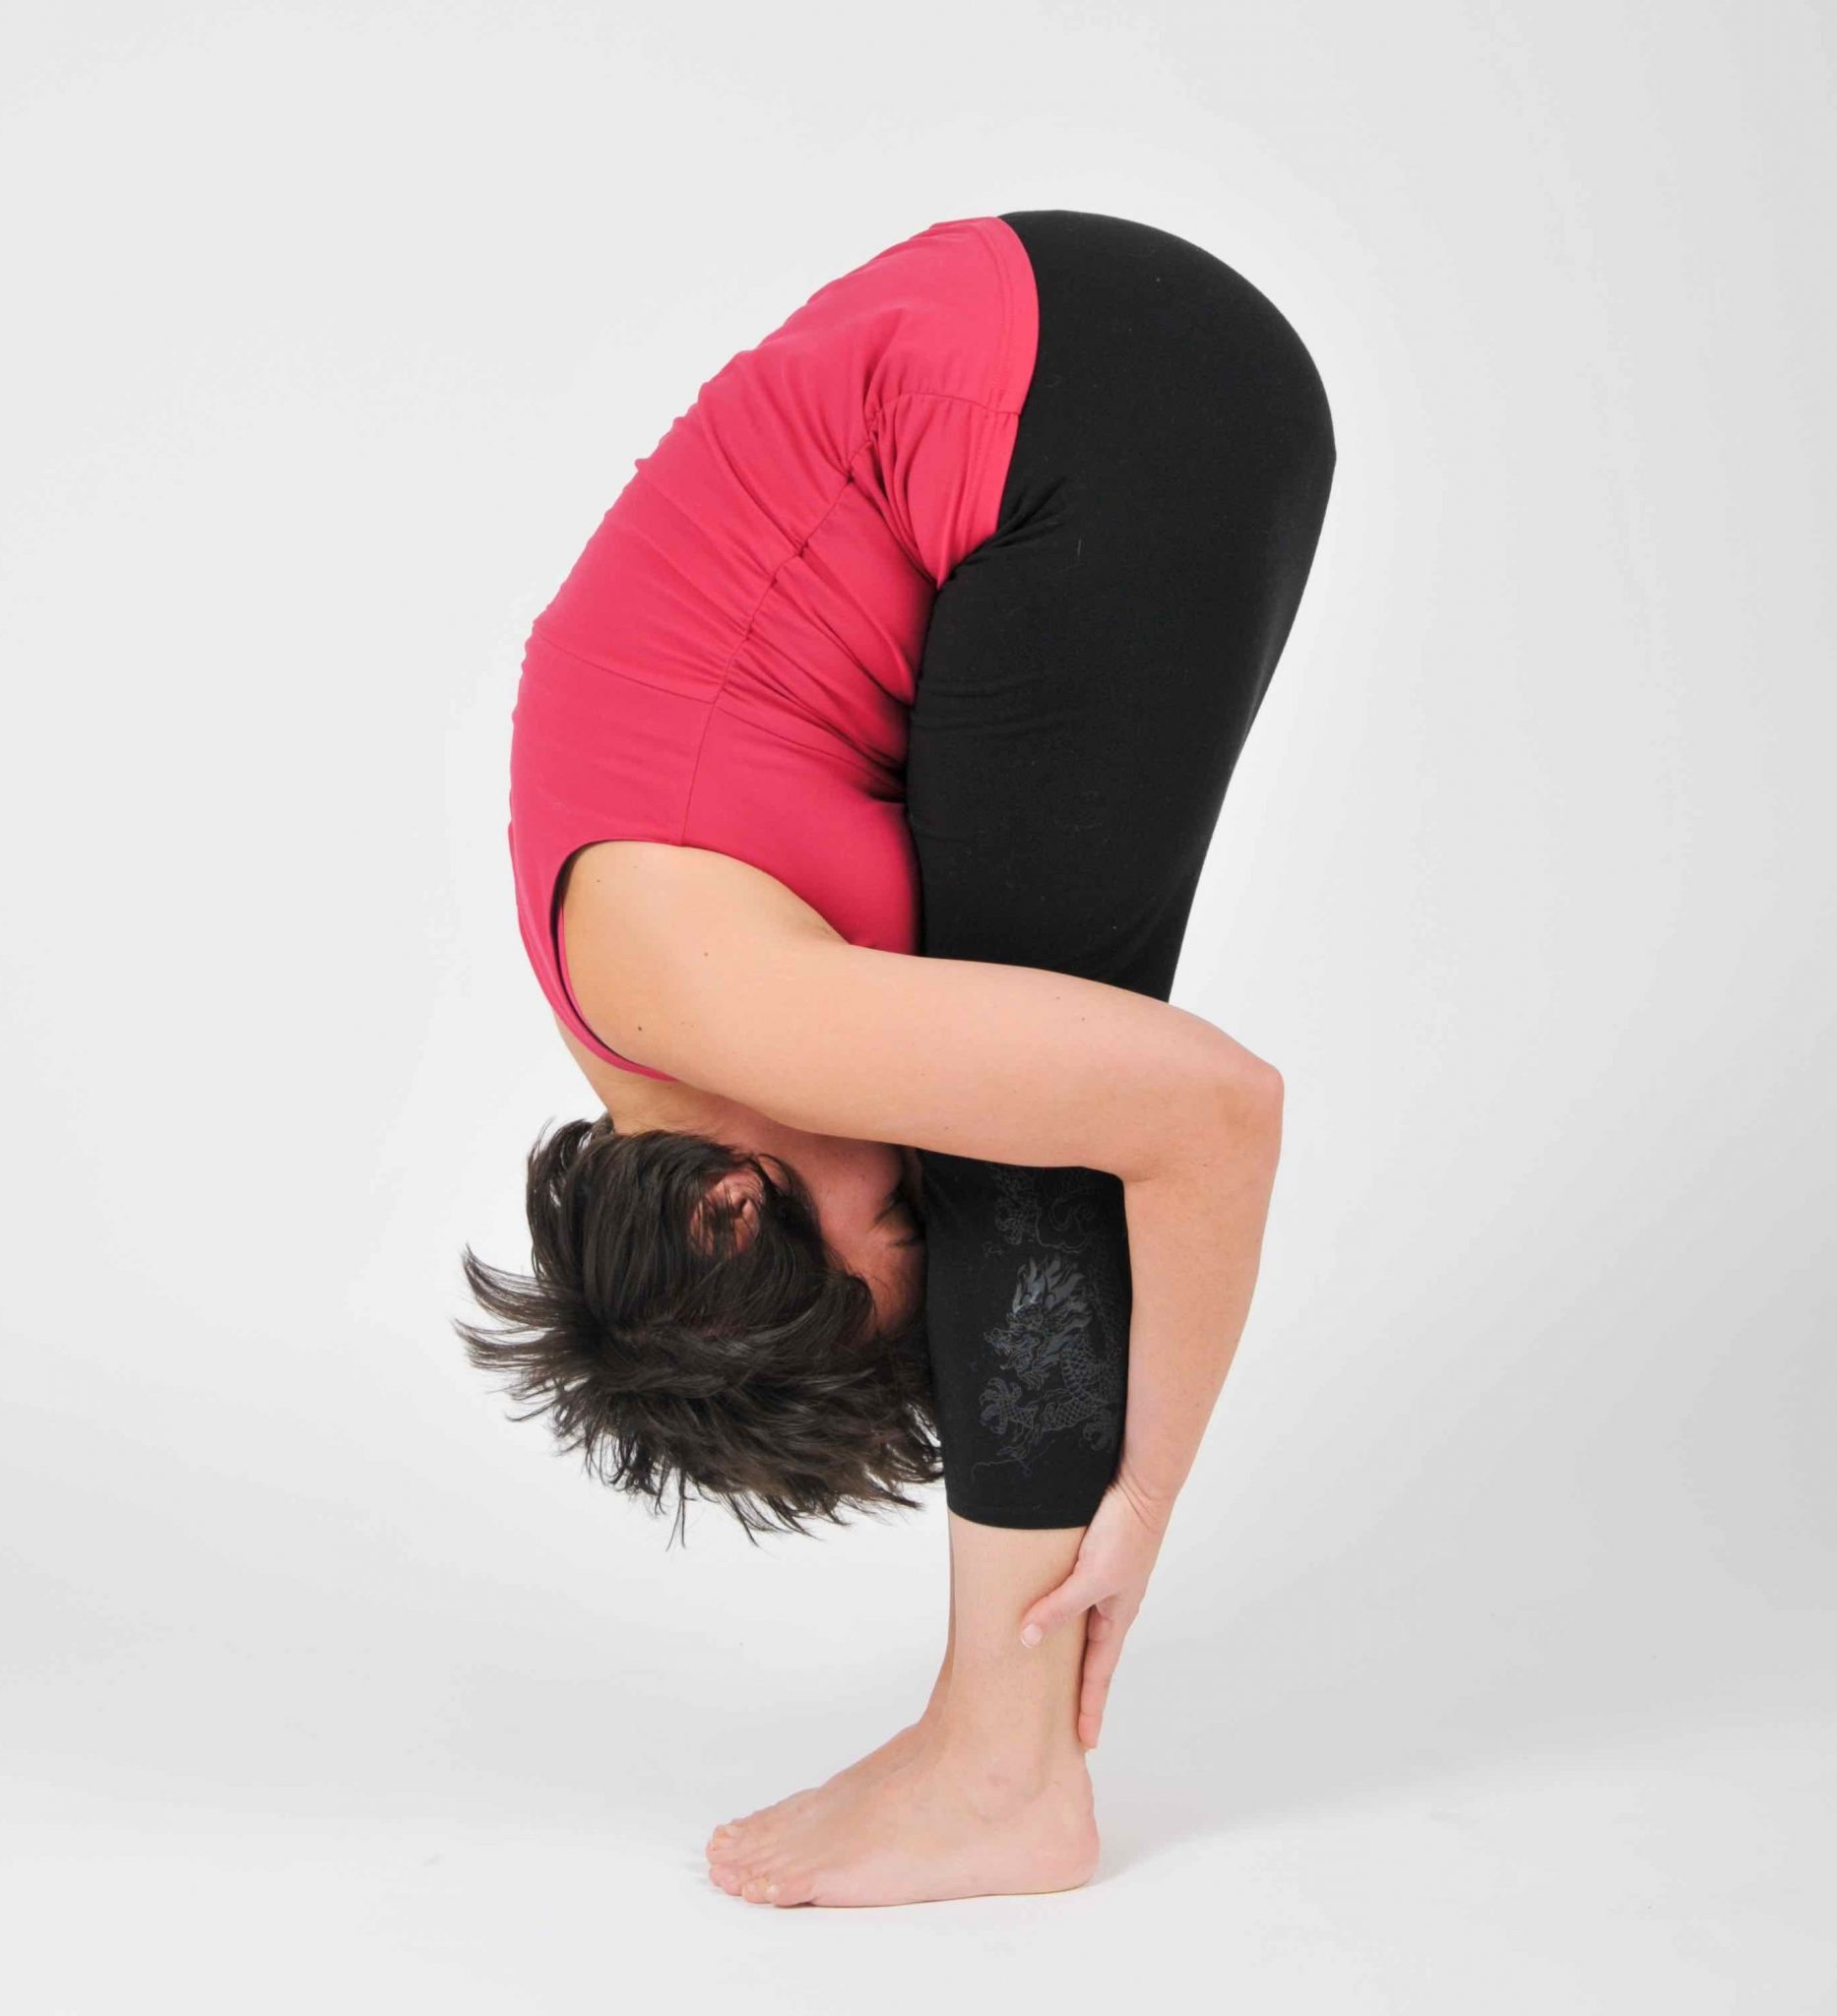 9 Yoga Poses for Weight Loss: Asanas to Help Burn Fat